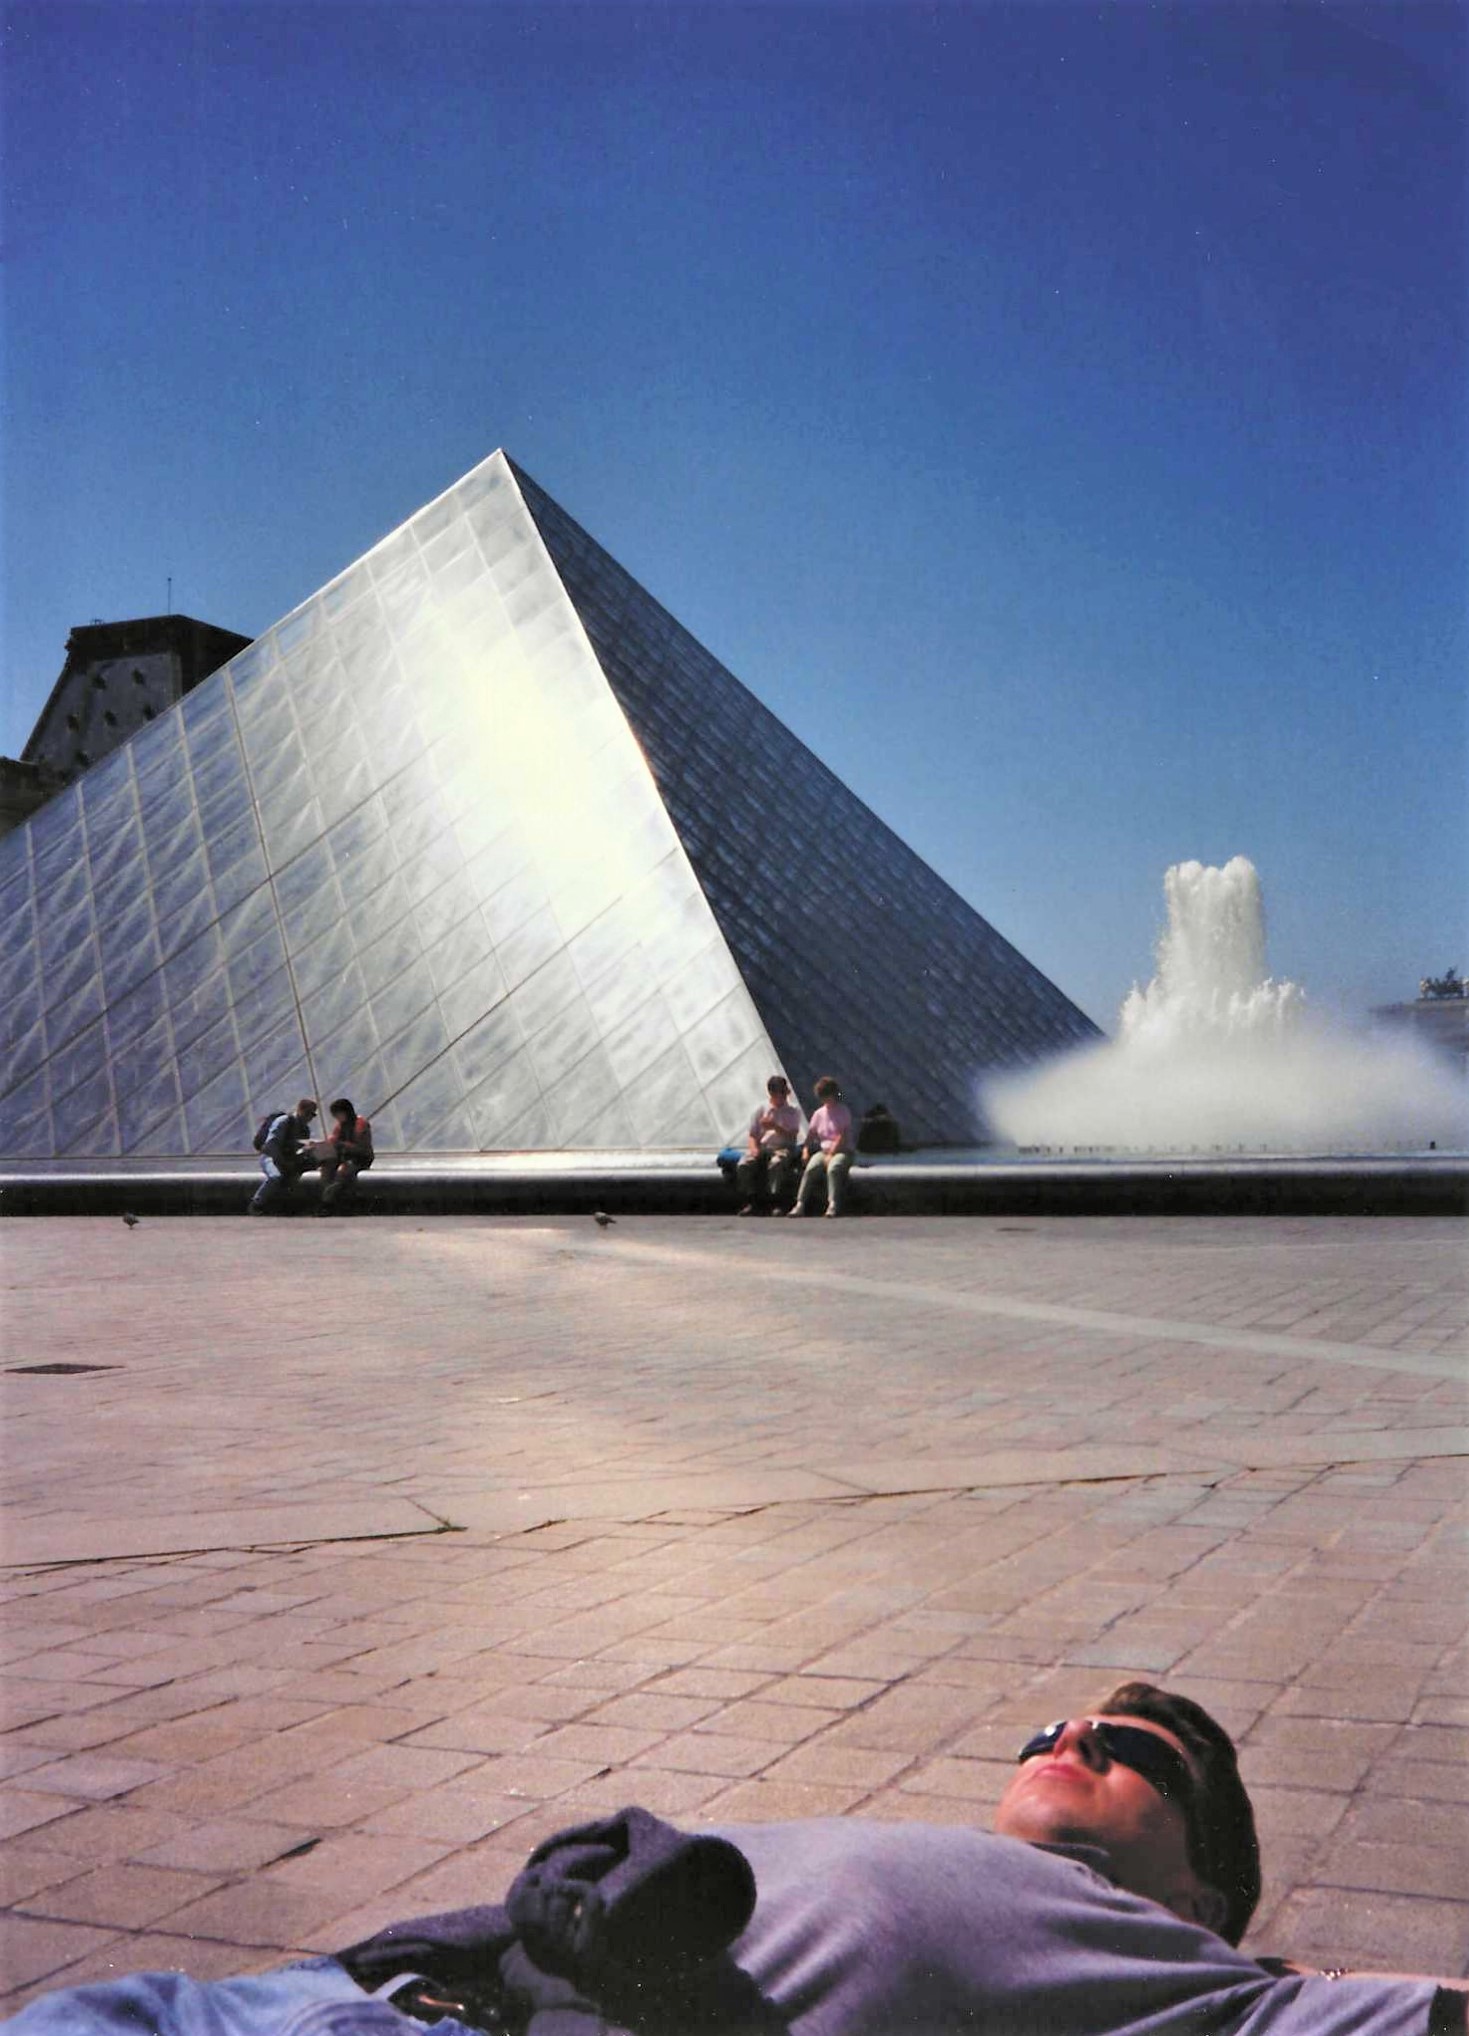 A lazy afternoon in Paris, France at the Louvre Museum